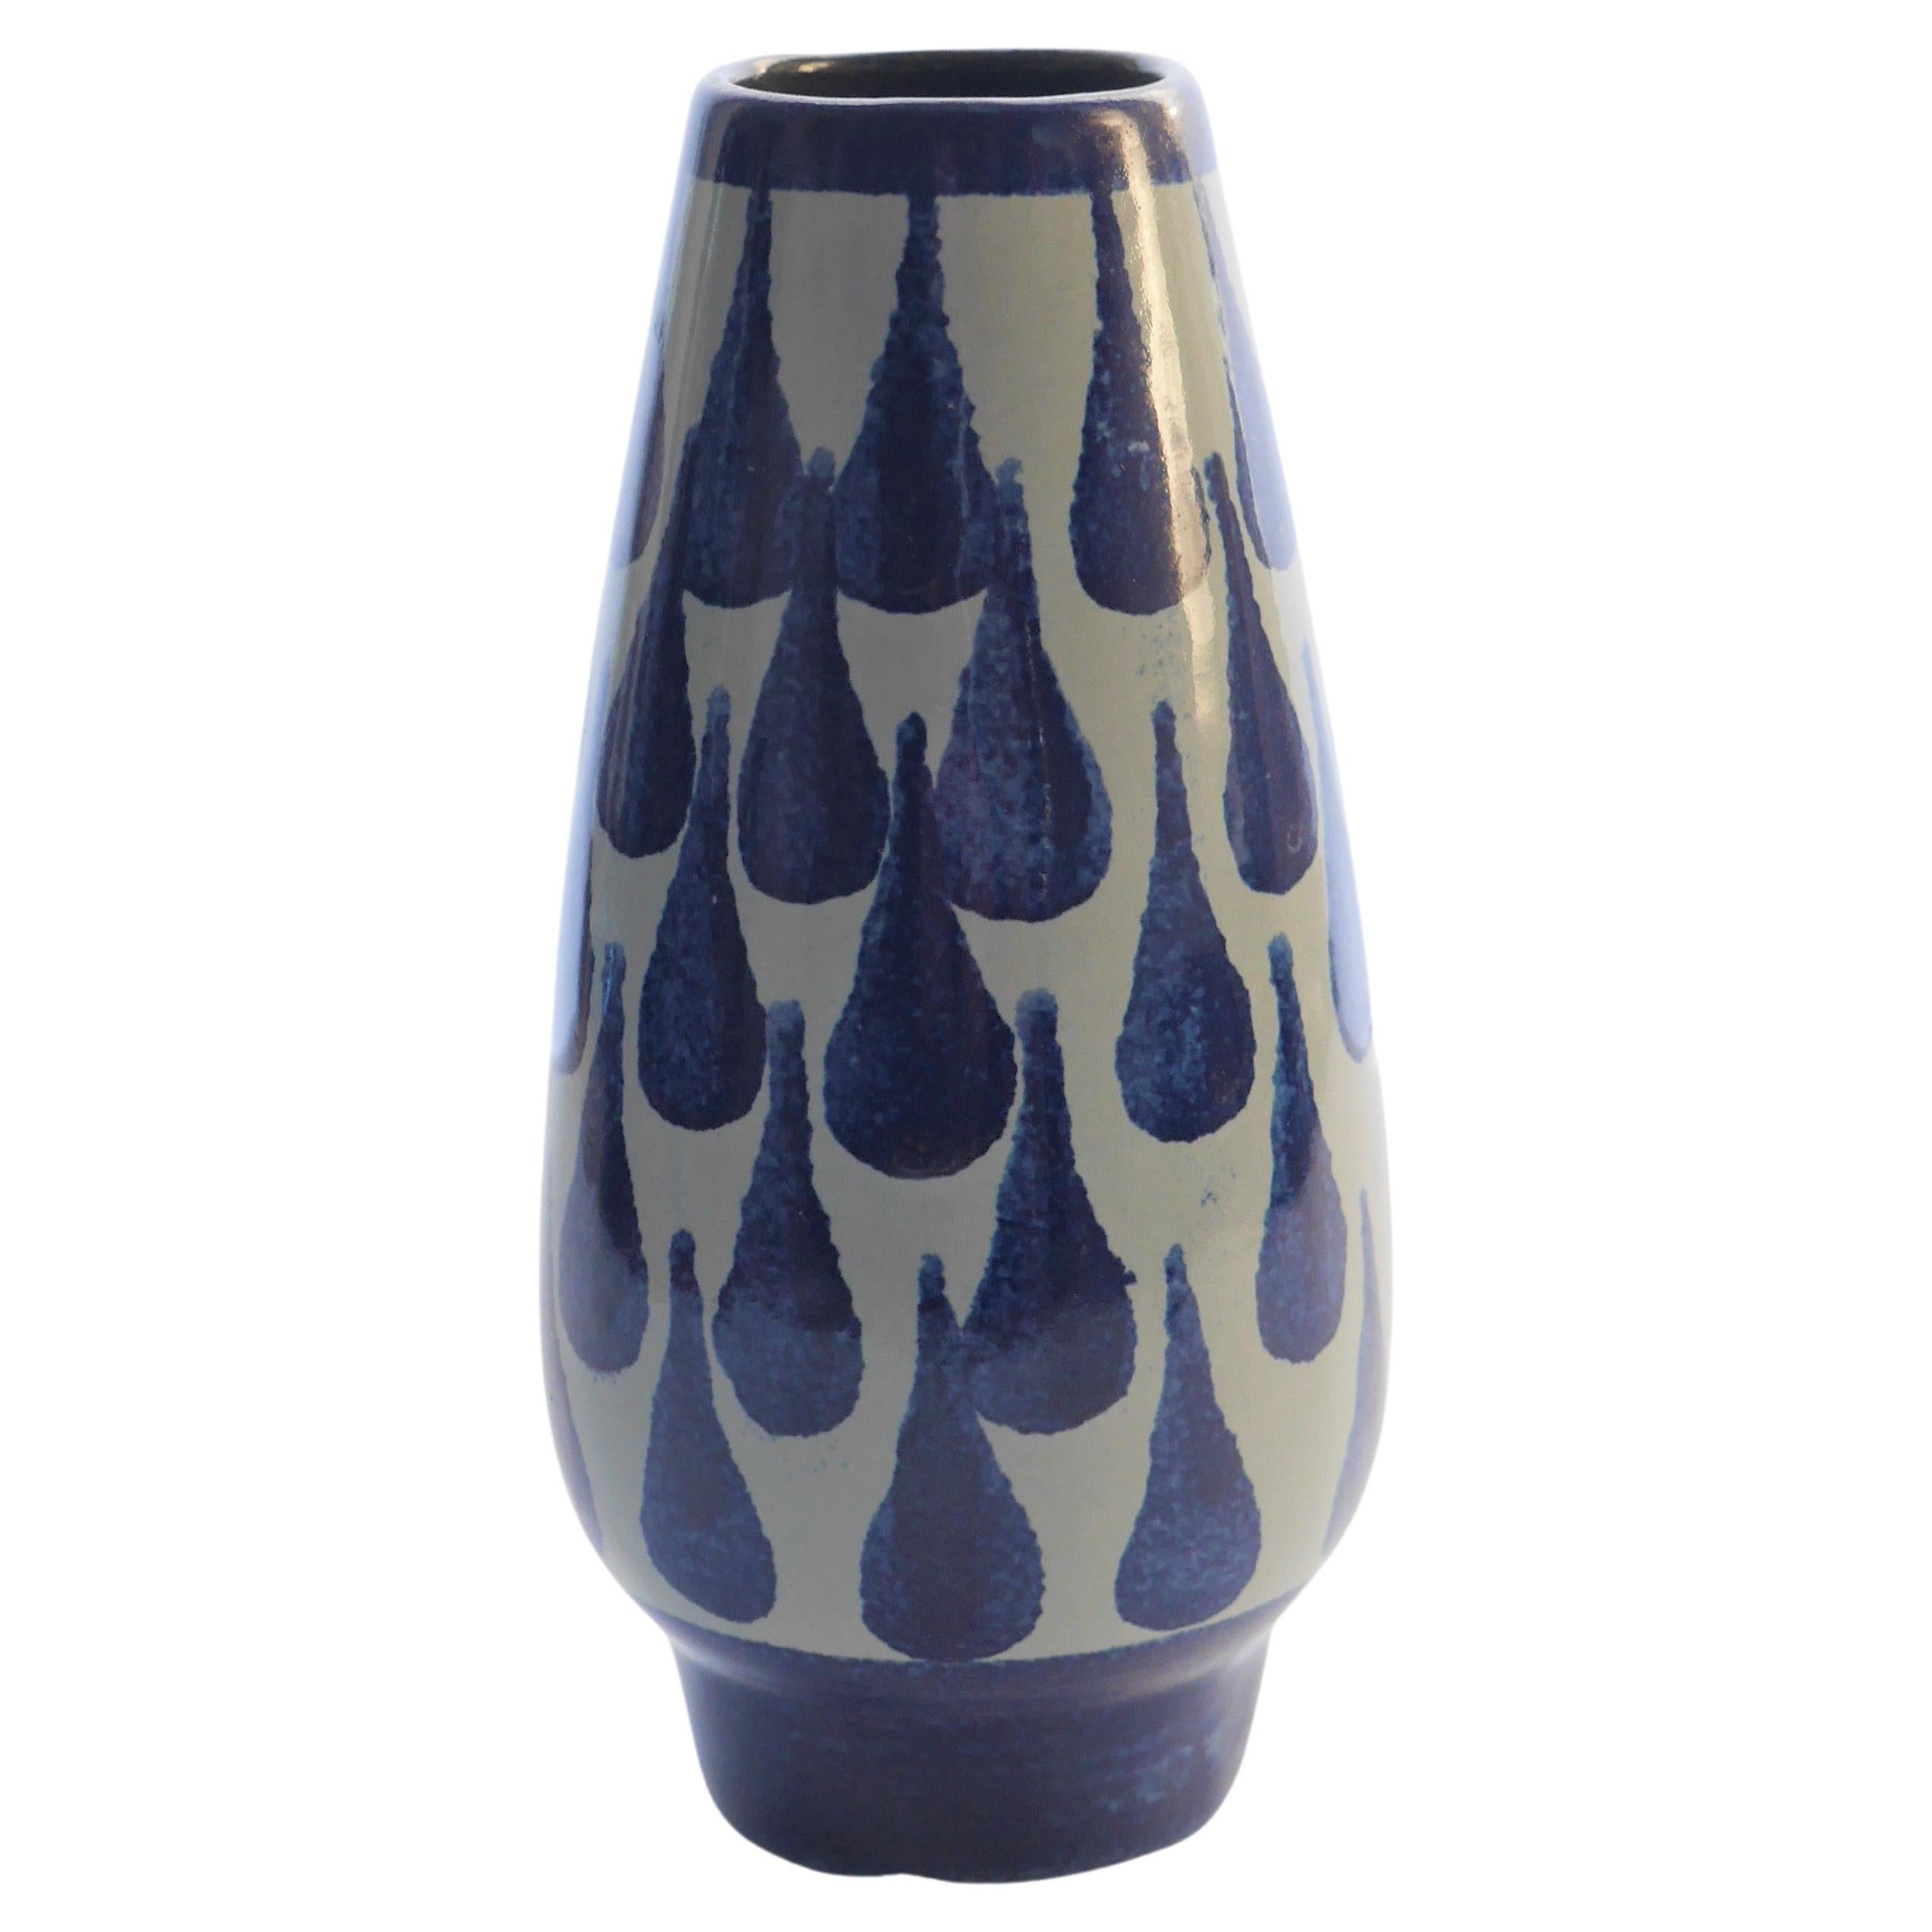 Small vase decorated with blue drop pattern from Strehla Keramik, Germany. 